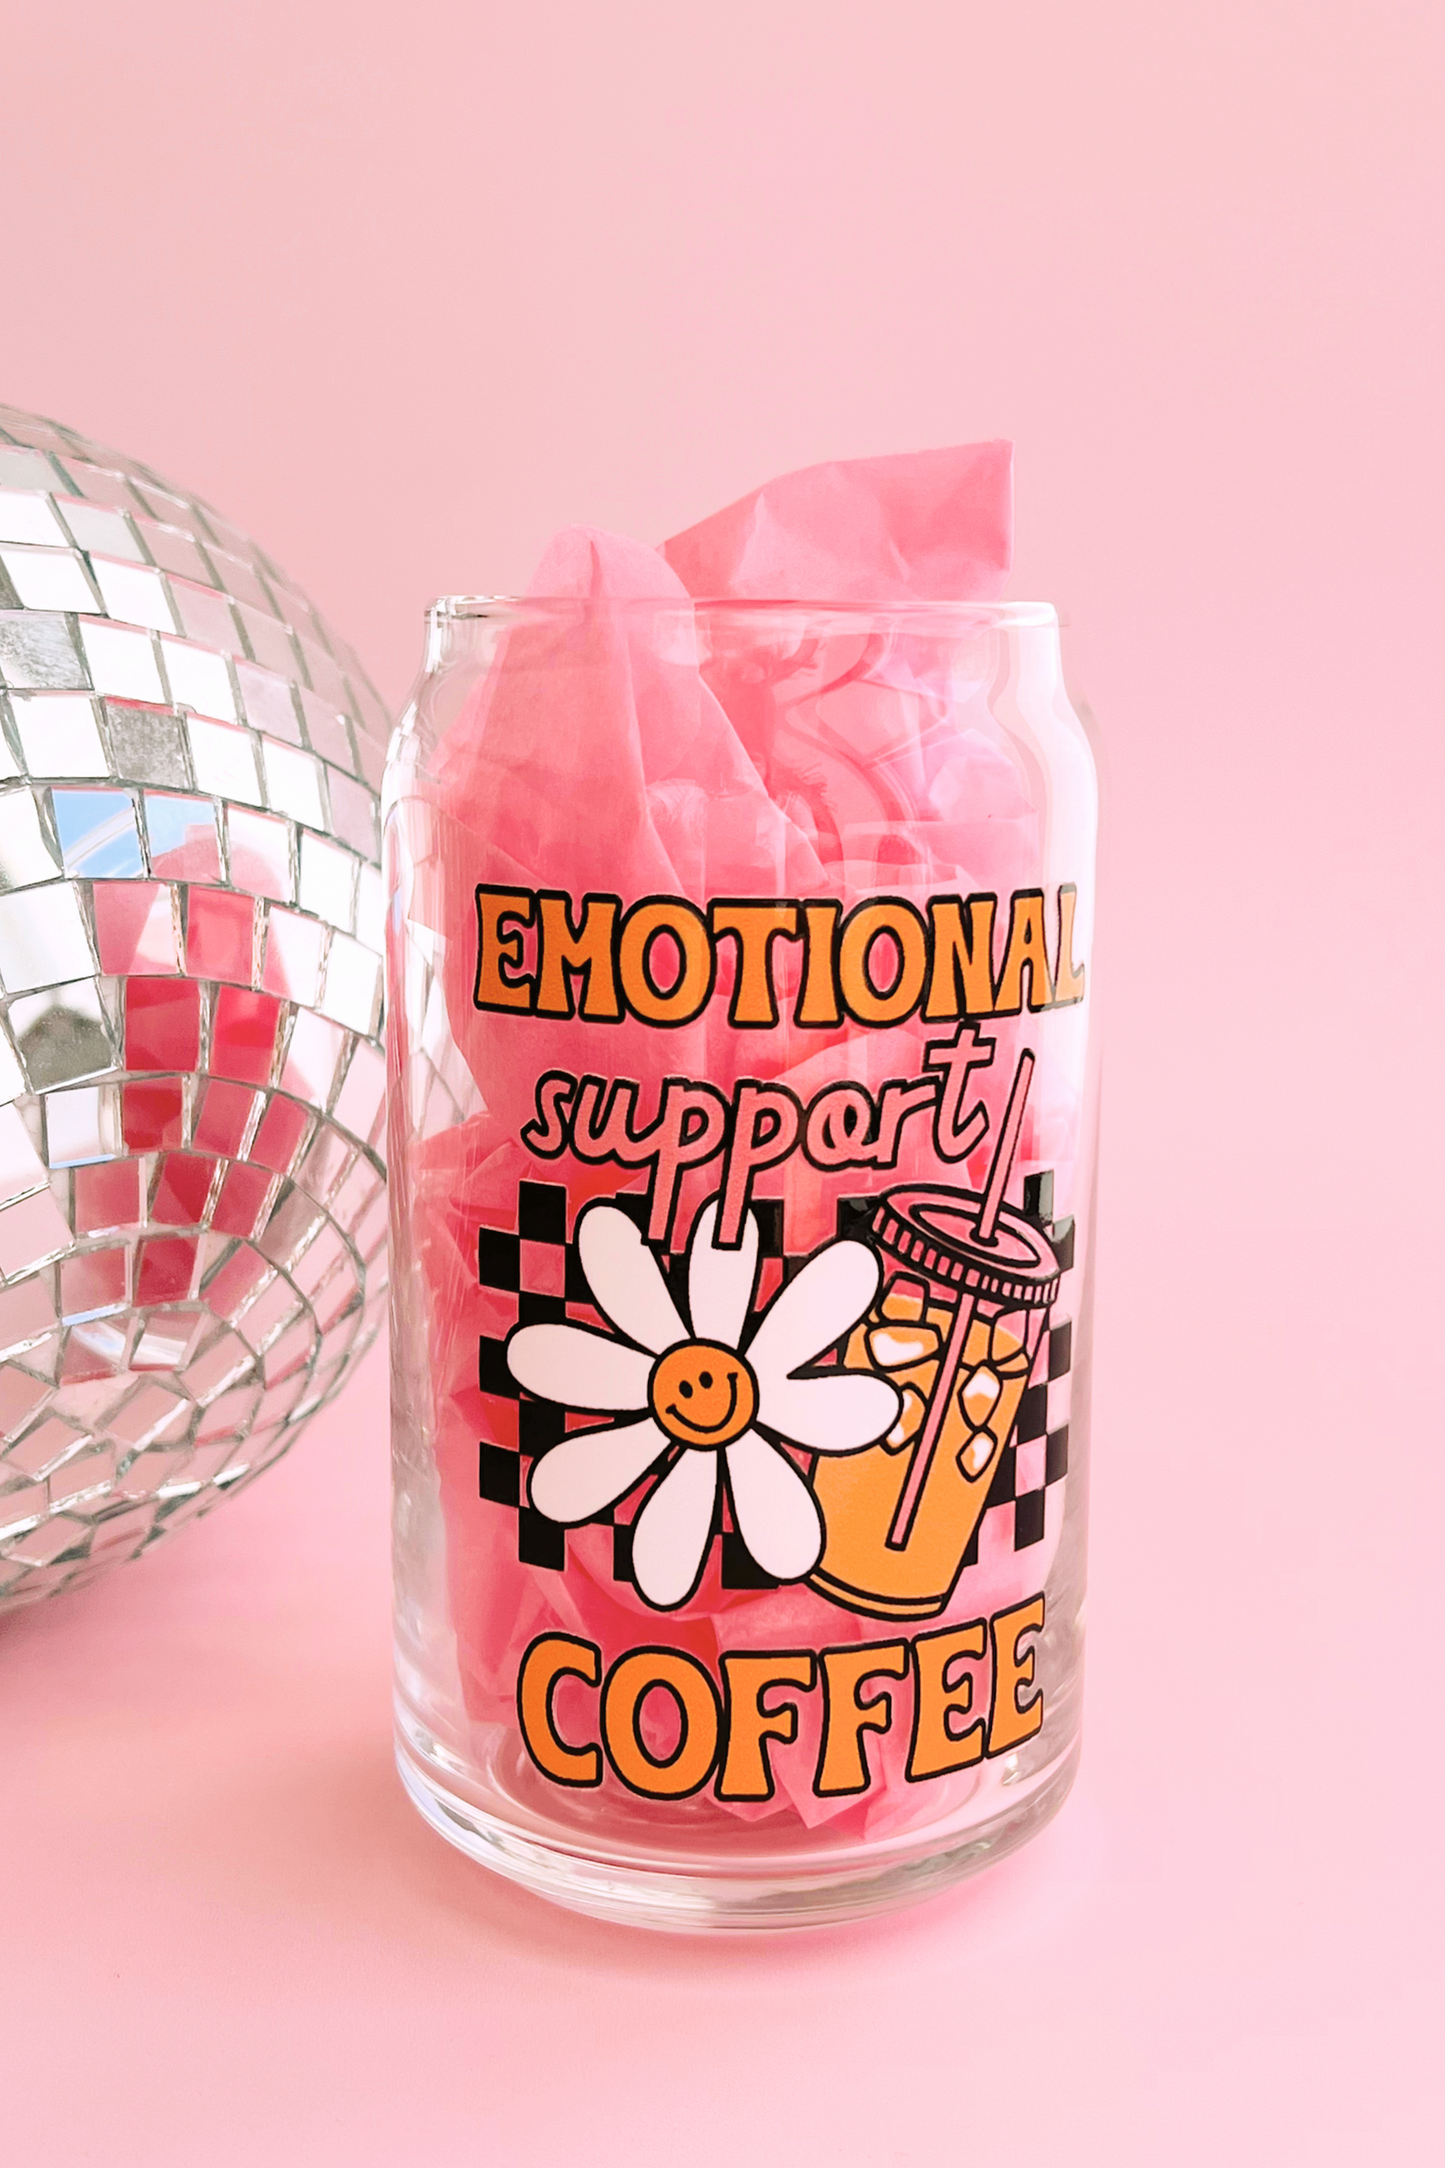 Emotional Support Iced Coffee Glass Cup